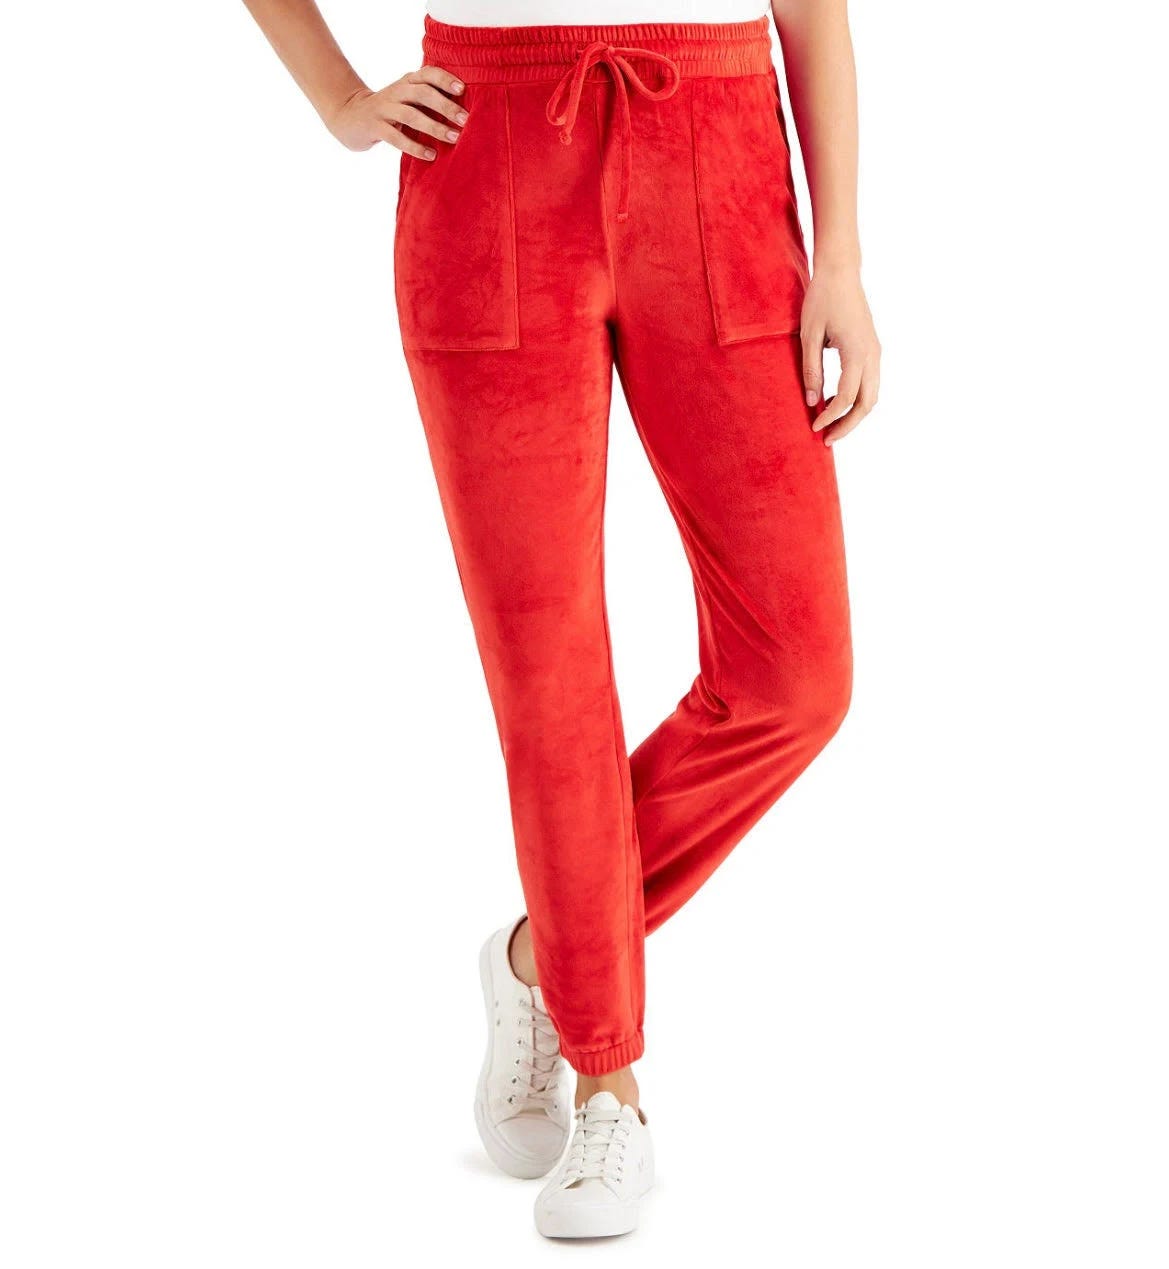 Comfy Red Jogger Pants for Women | Image